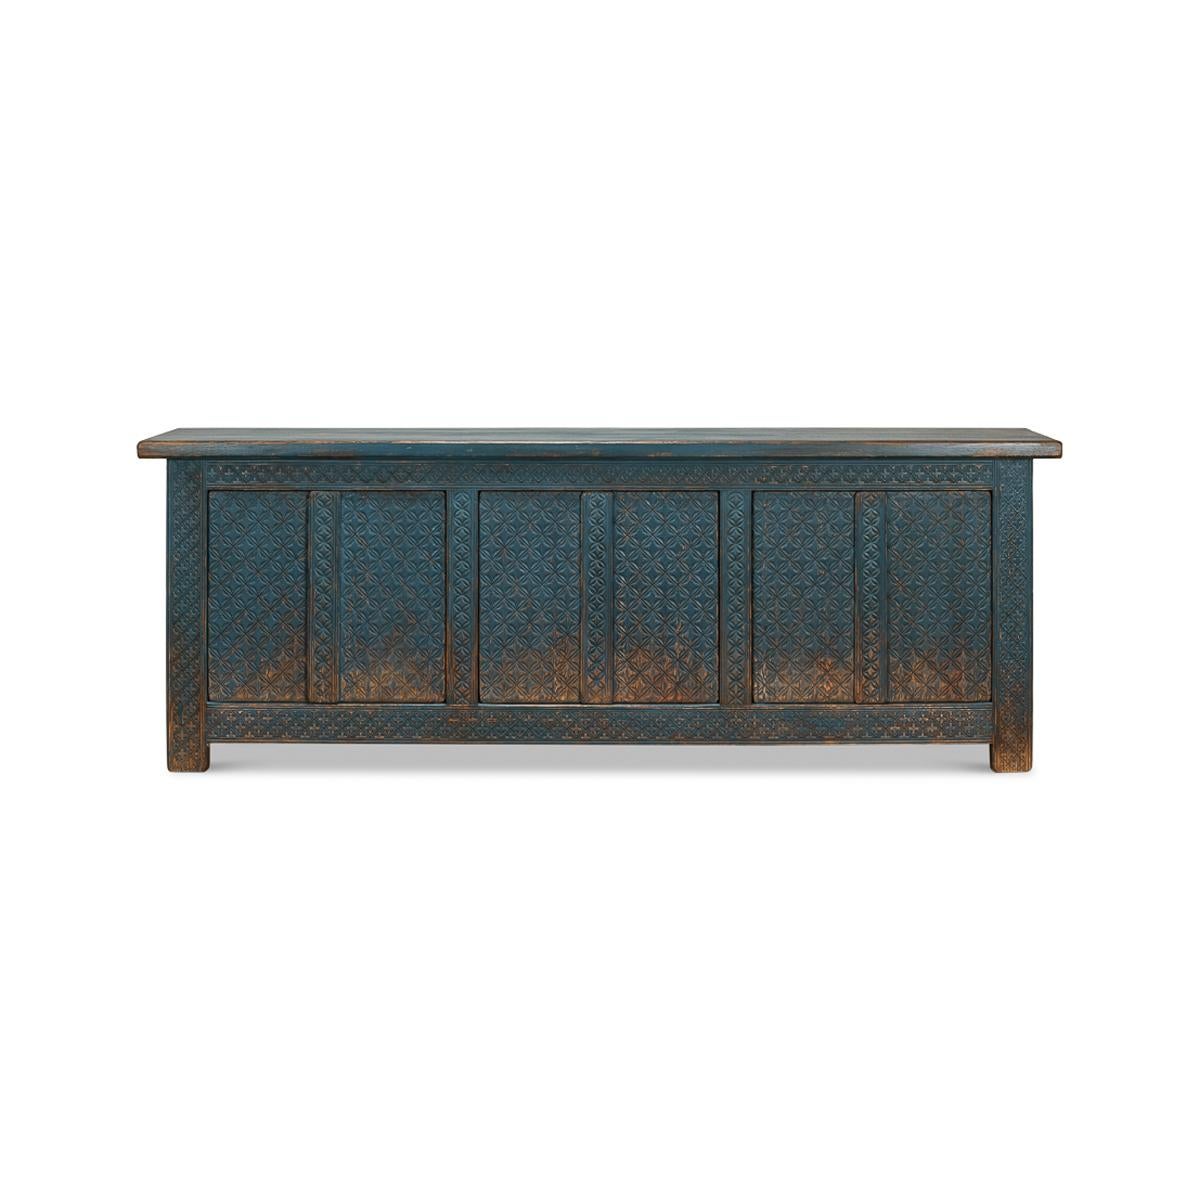 Carved reclaimed pine in a dark blue distressed and antiqued finish. Six cabinet doors open to reveal a painted interior with removable shelves.

Dimensions: 98